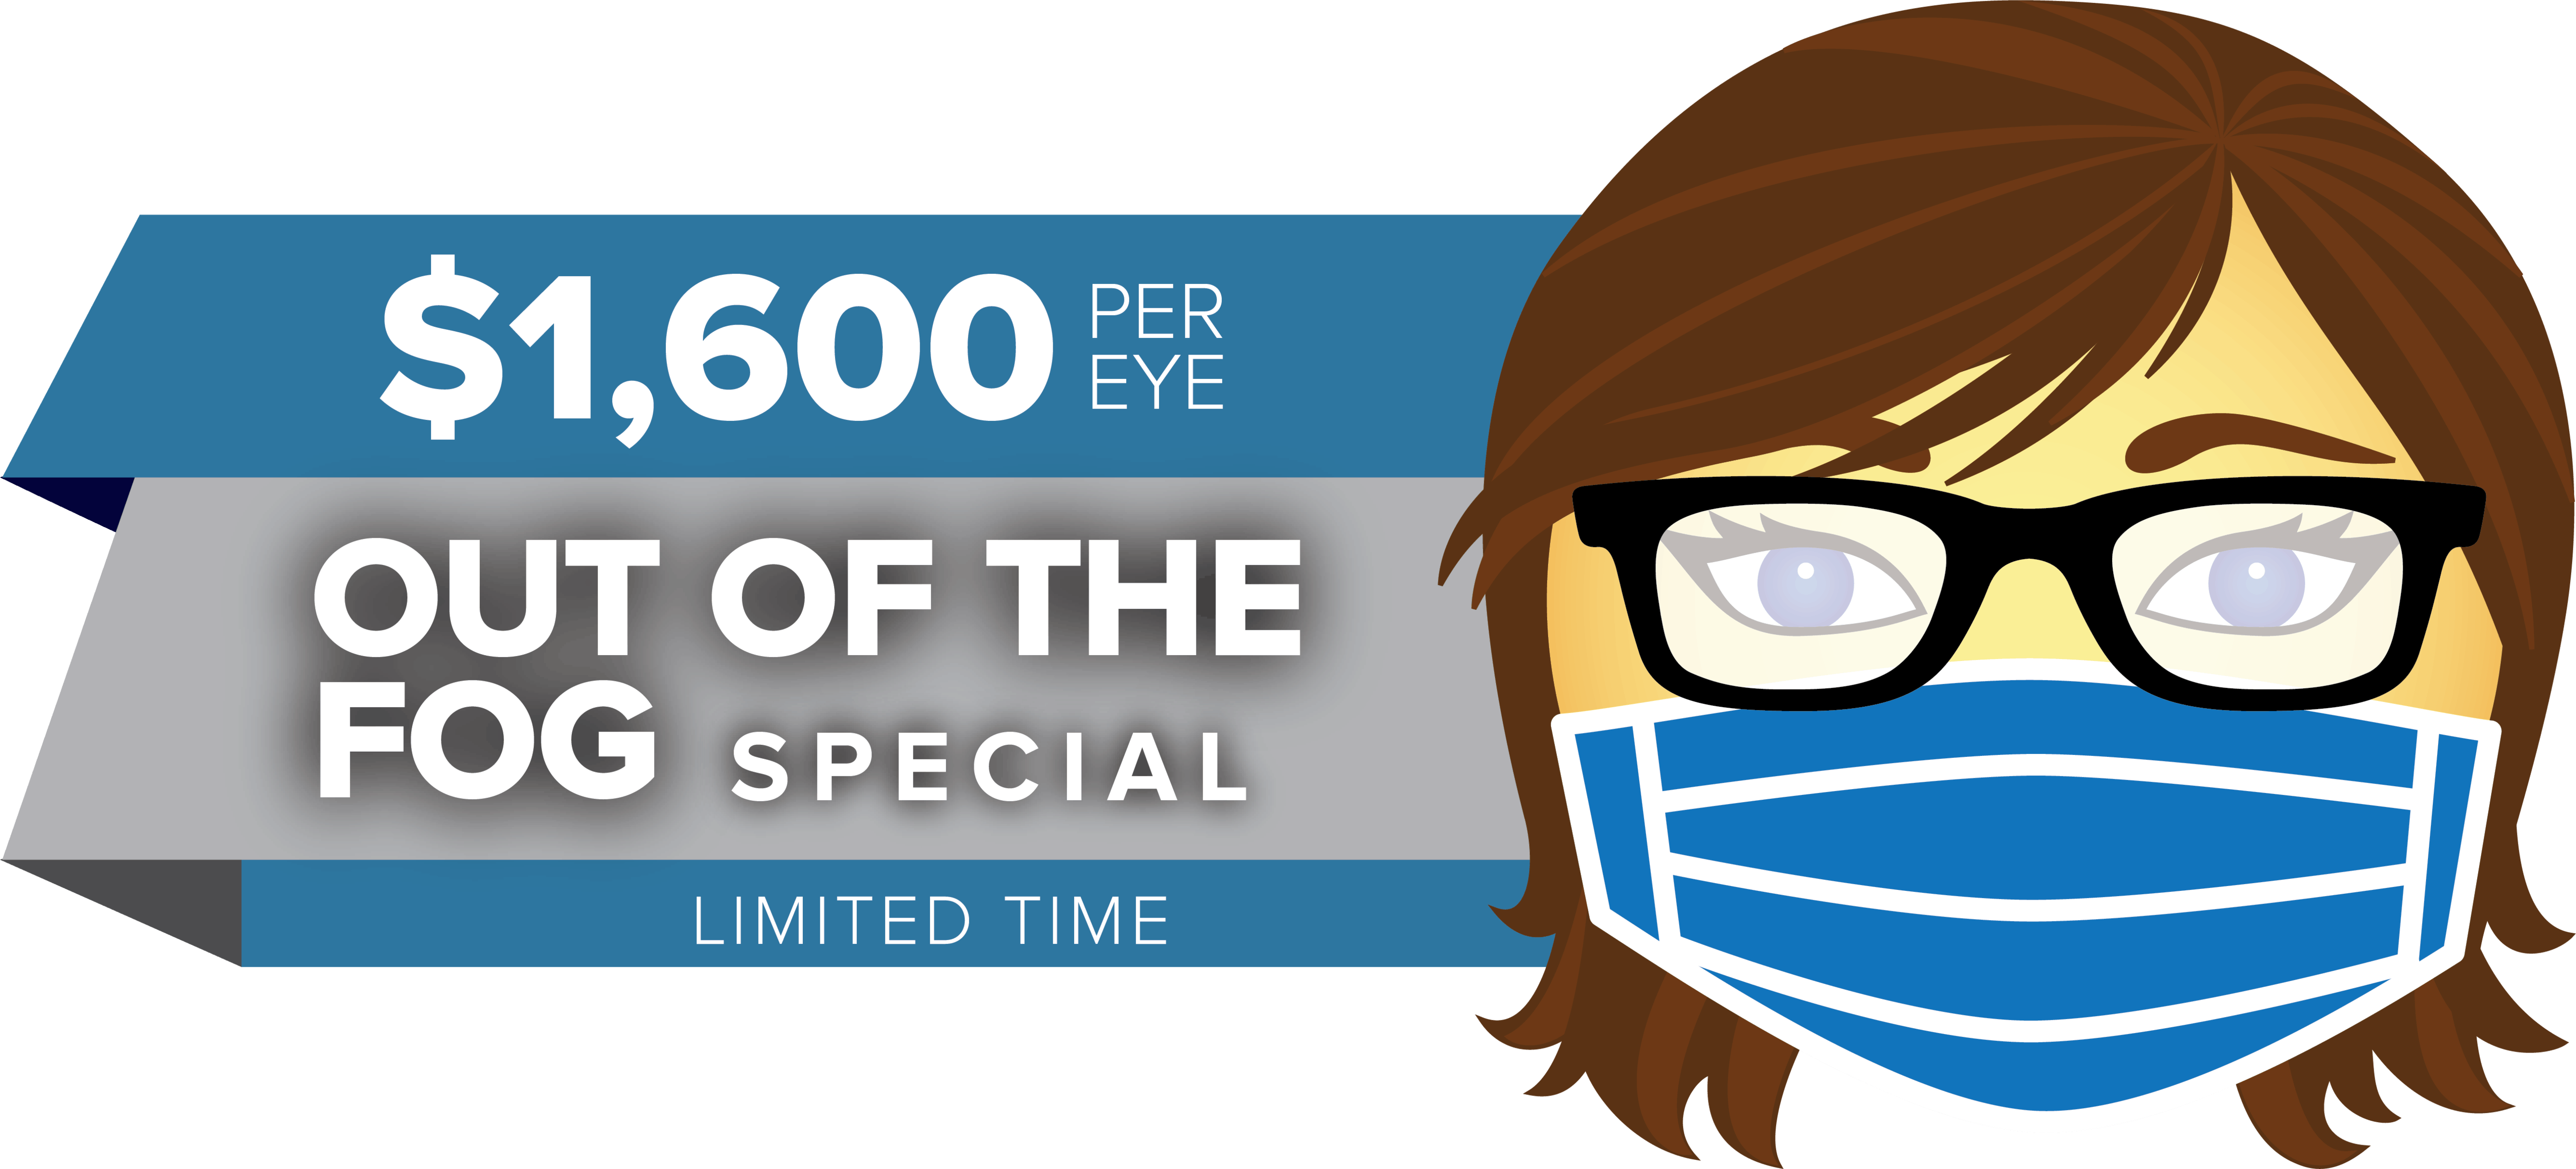 Out of the Fog Special at LA Sight: $1,600/eye LASIK